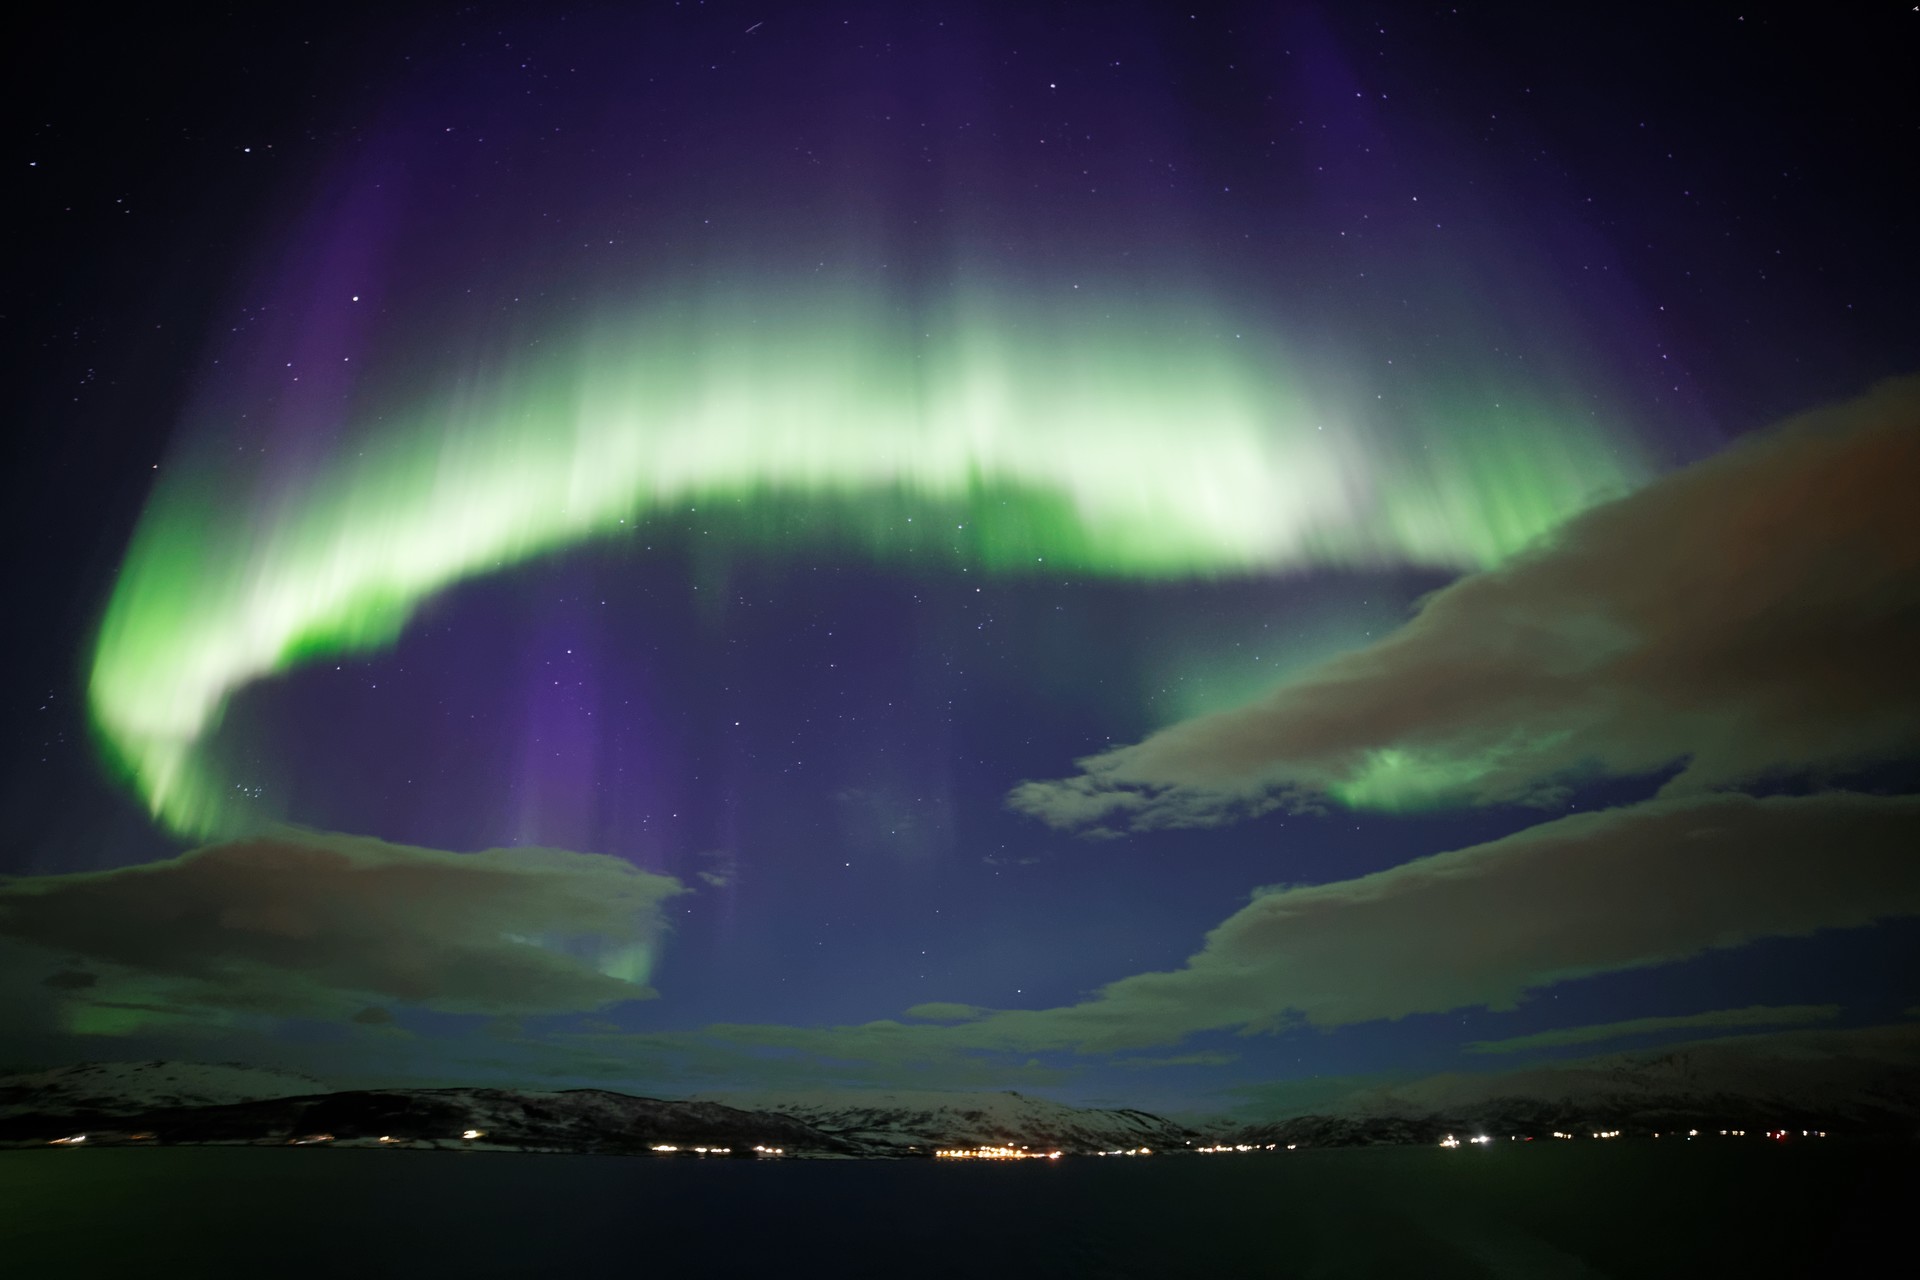 Hurry, book now to experience the Northern Lights and save